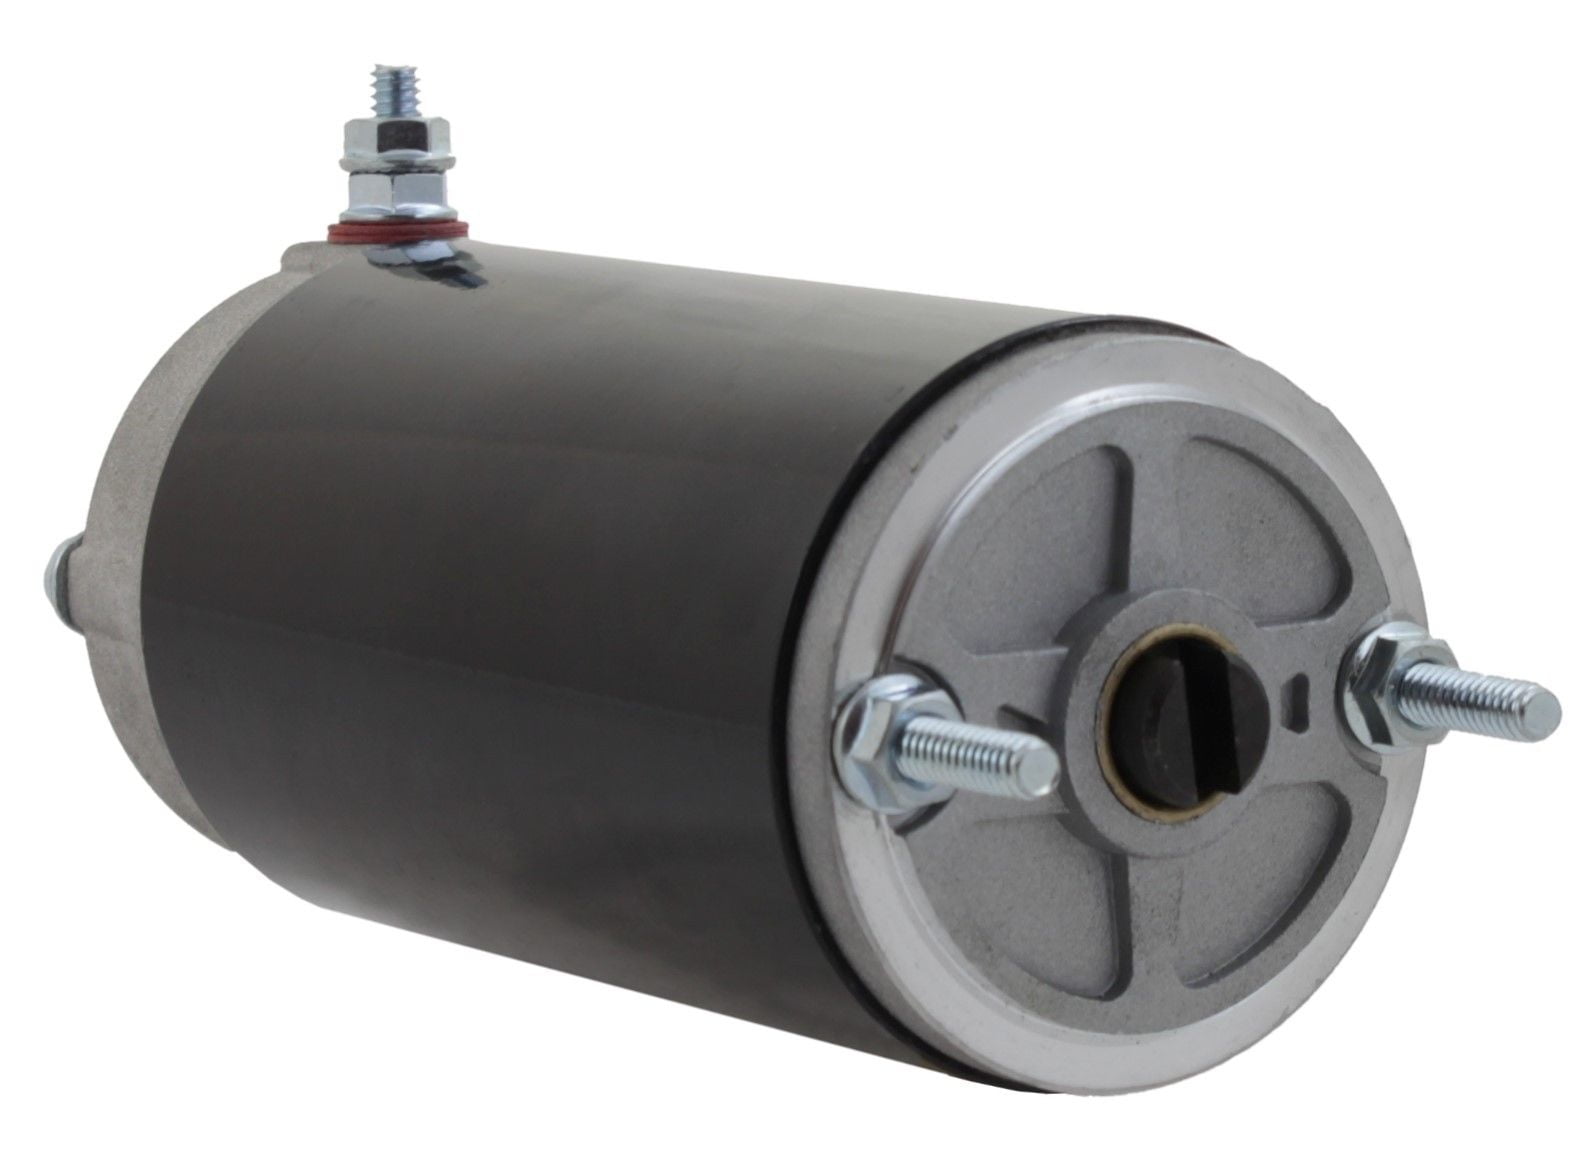 Rareelectrical NEW MEYER SNOW PLOW MOTOR COMPATIBLE WITH E57 E60 PUMPS REPLACES MUE6209S 2869AB 15689 15727 